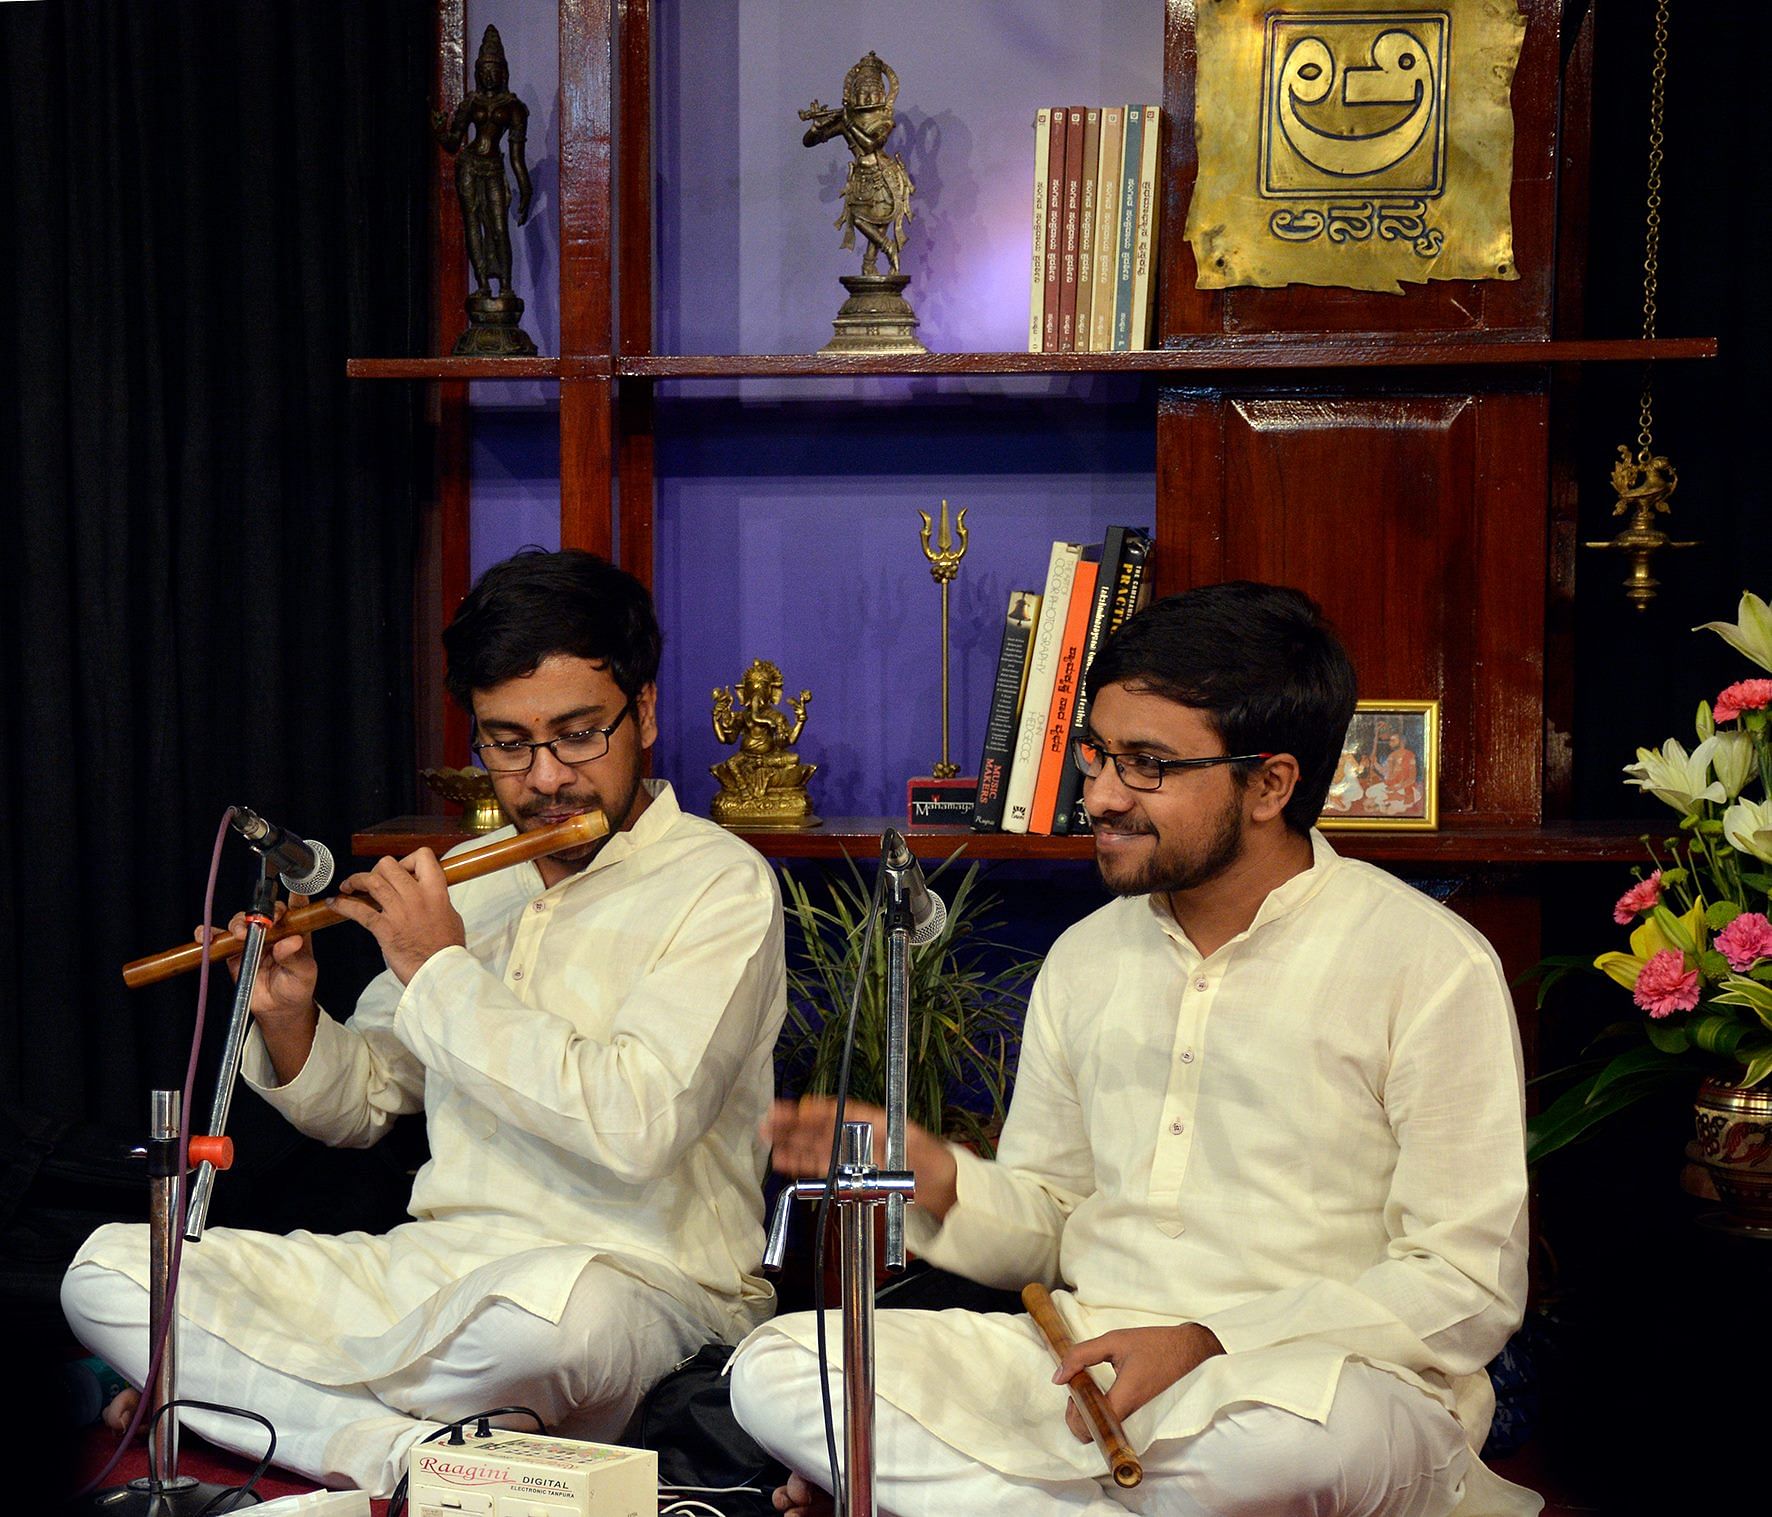 Heramba and Hemantha are the most promising flautists in the Carnatic music scenario today. The twin brothers, born in a musical family, started learning both carnatic vocal and carnatic flute at the age of seven. They recently completed their Engineering in Information Science and are gearing up for upcoming shows.